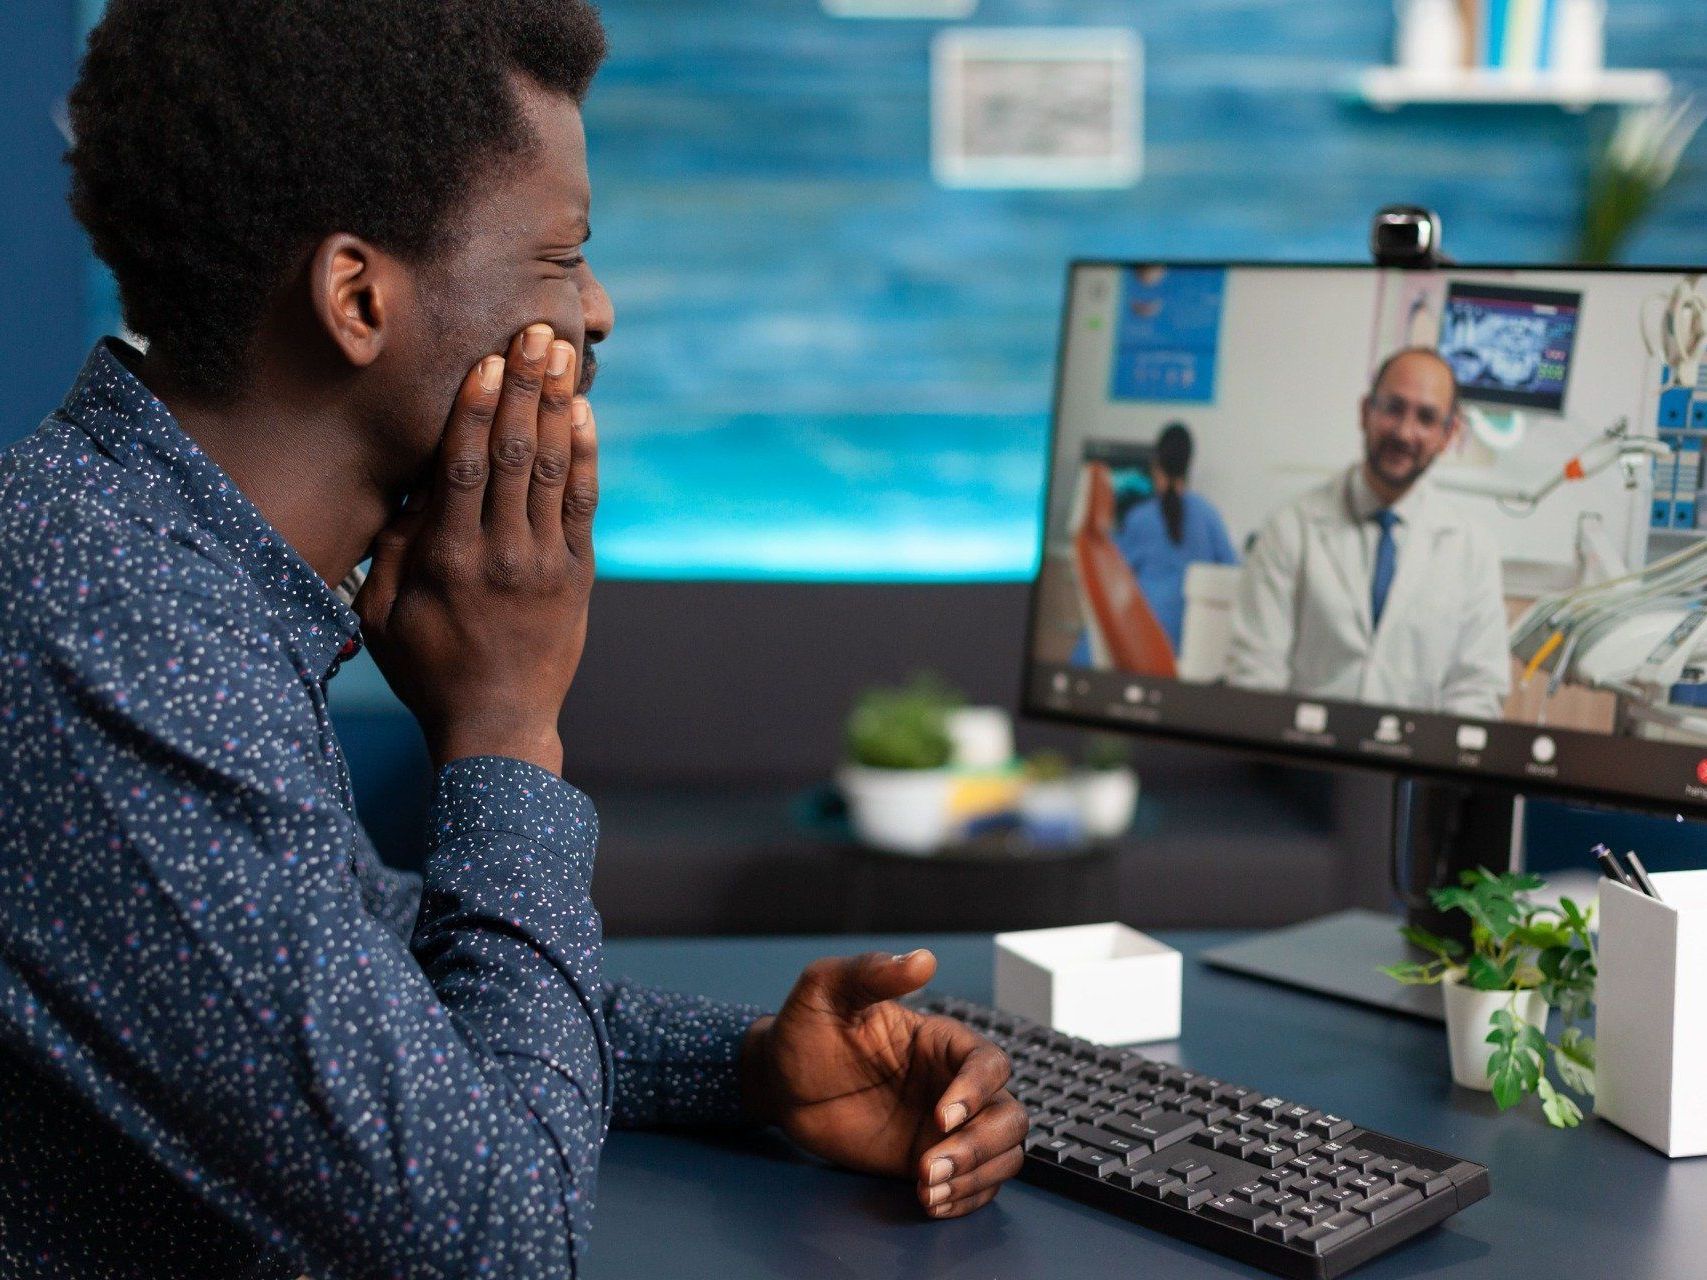 An image of a black man with tooth pain on a virtual call with a dentist